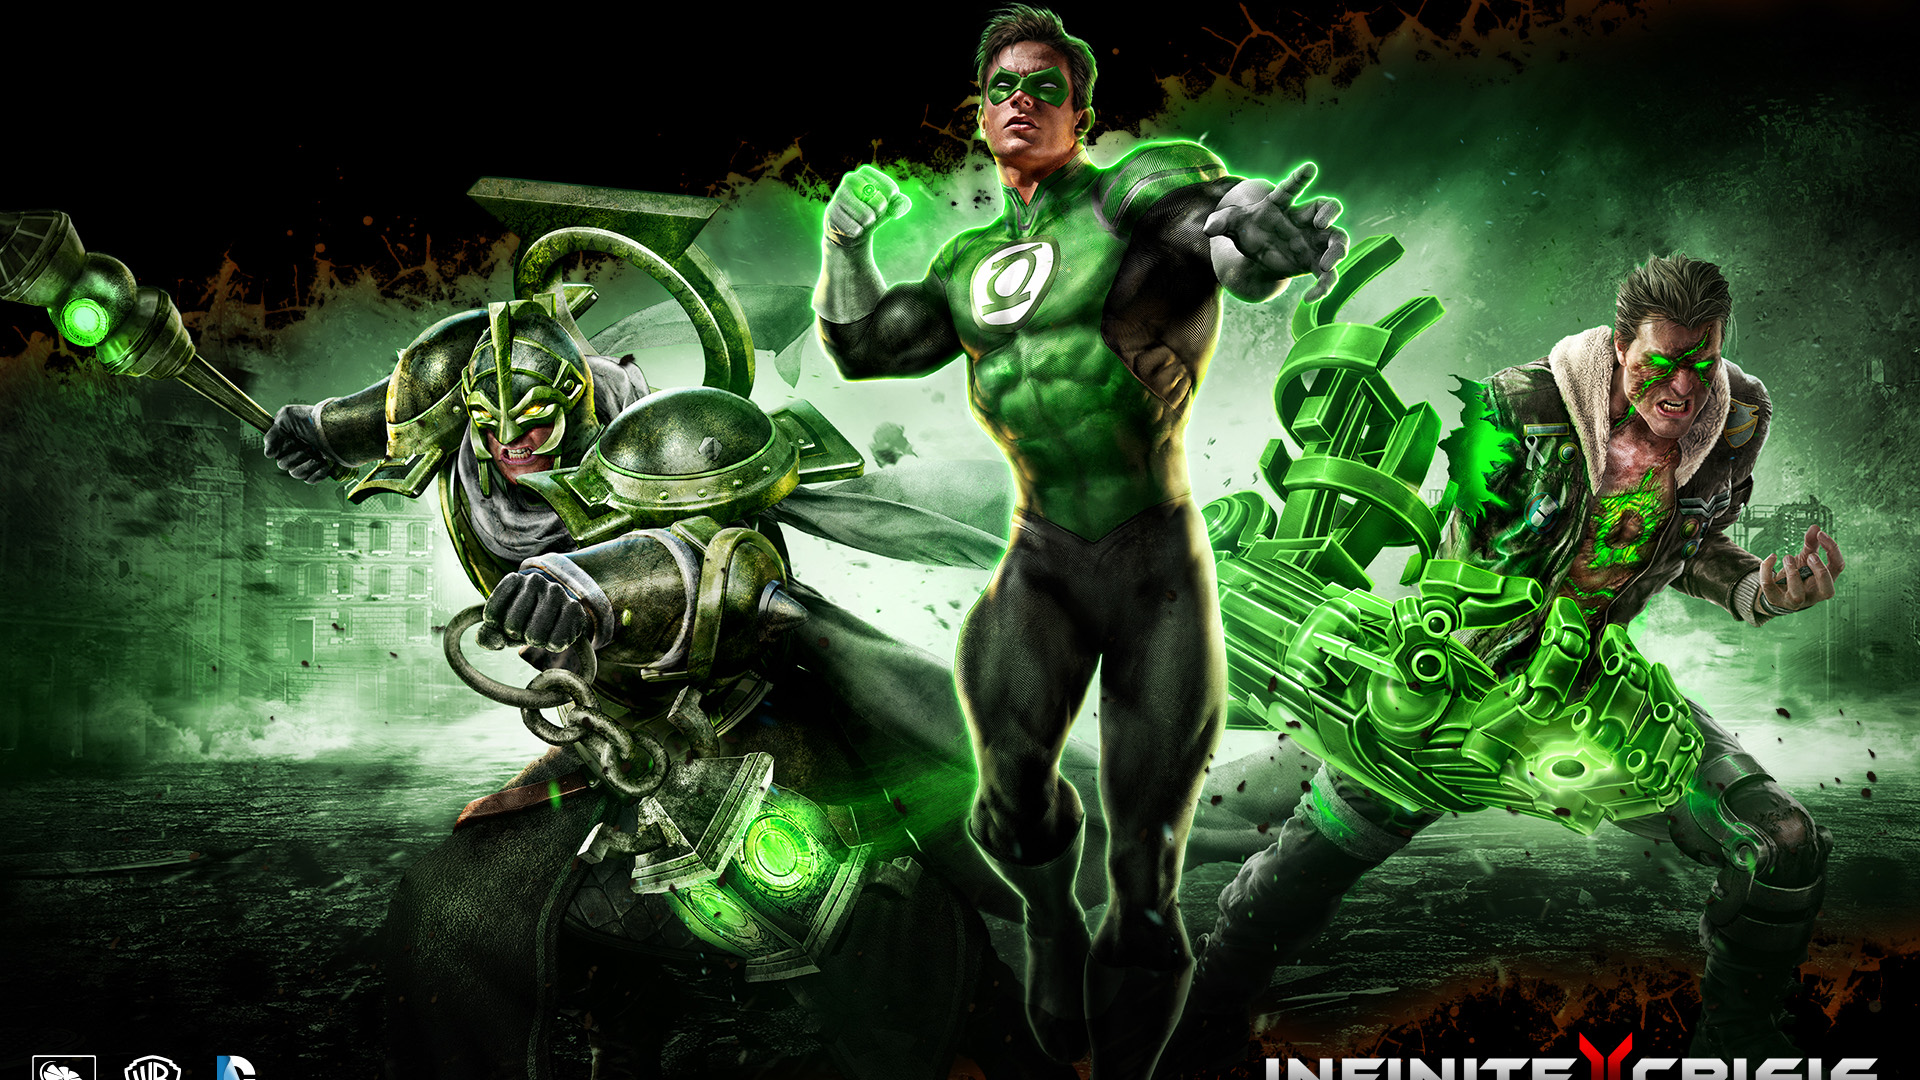 Green Lantern Background For Your